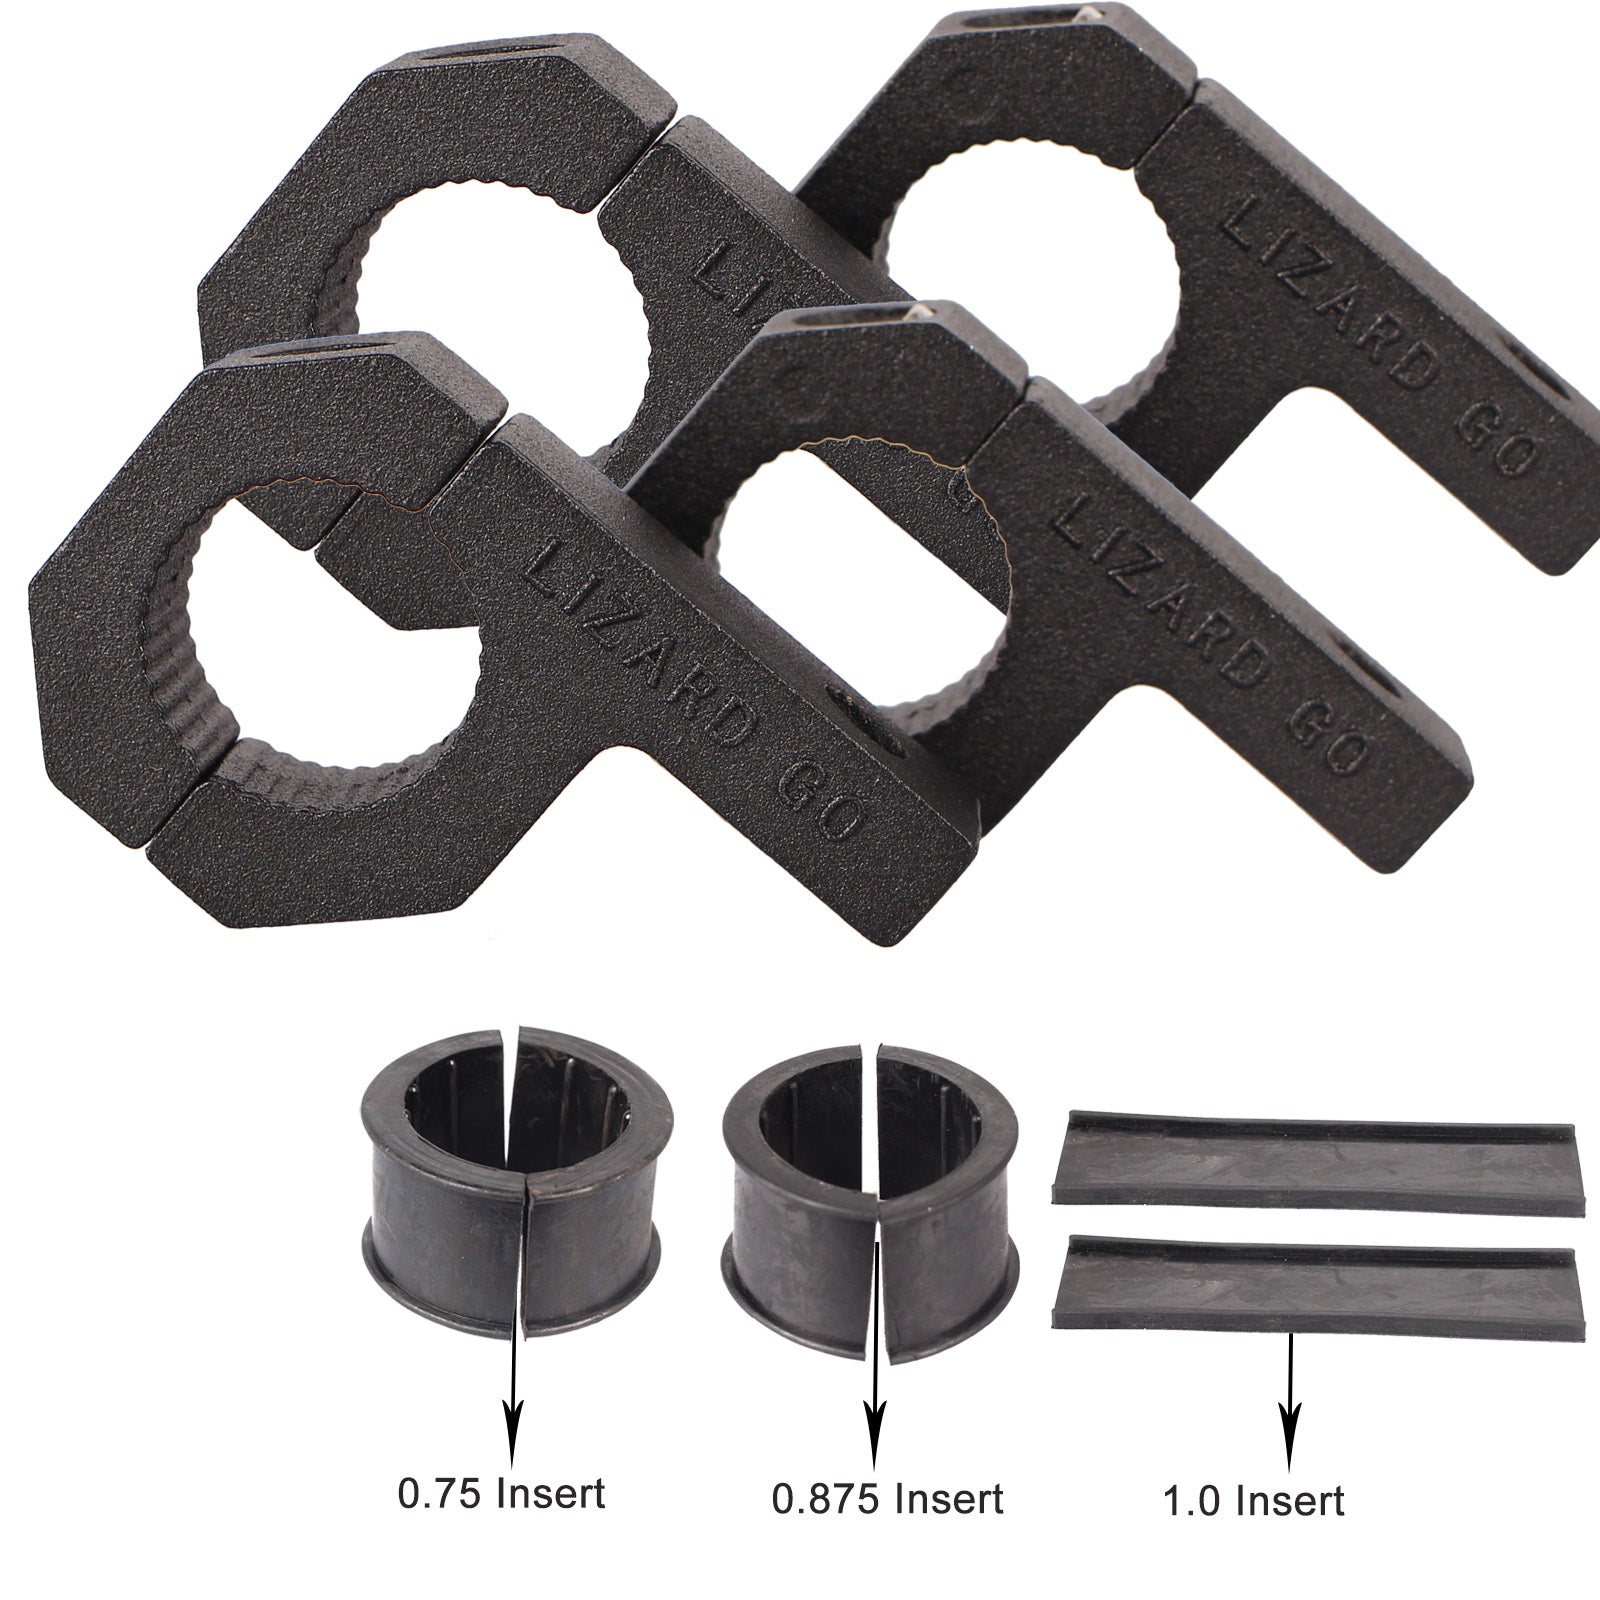 0.75 inch 0.875 inch 1.0 inch Bar Clamps - 4Pac Horizontal Roll